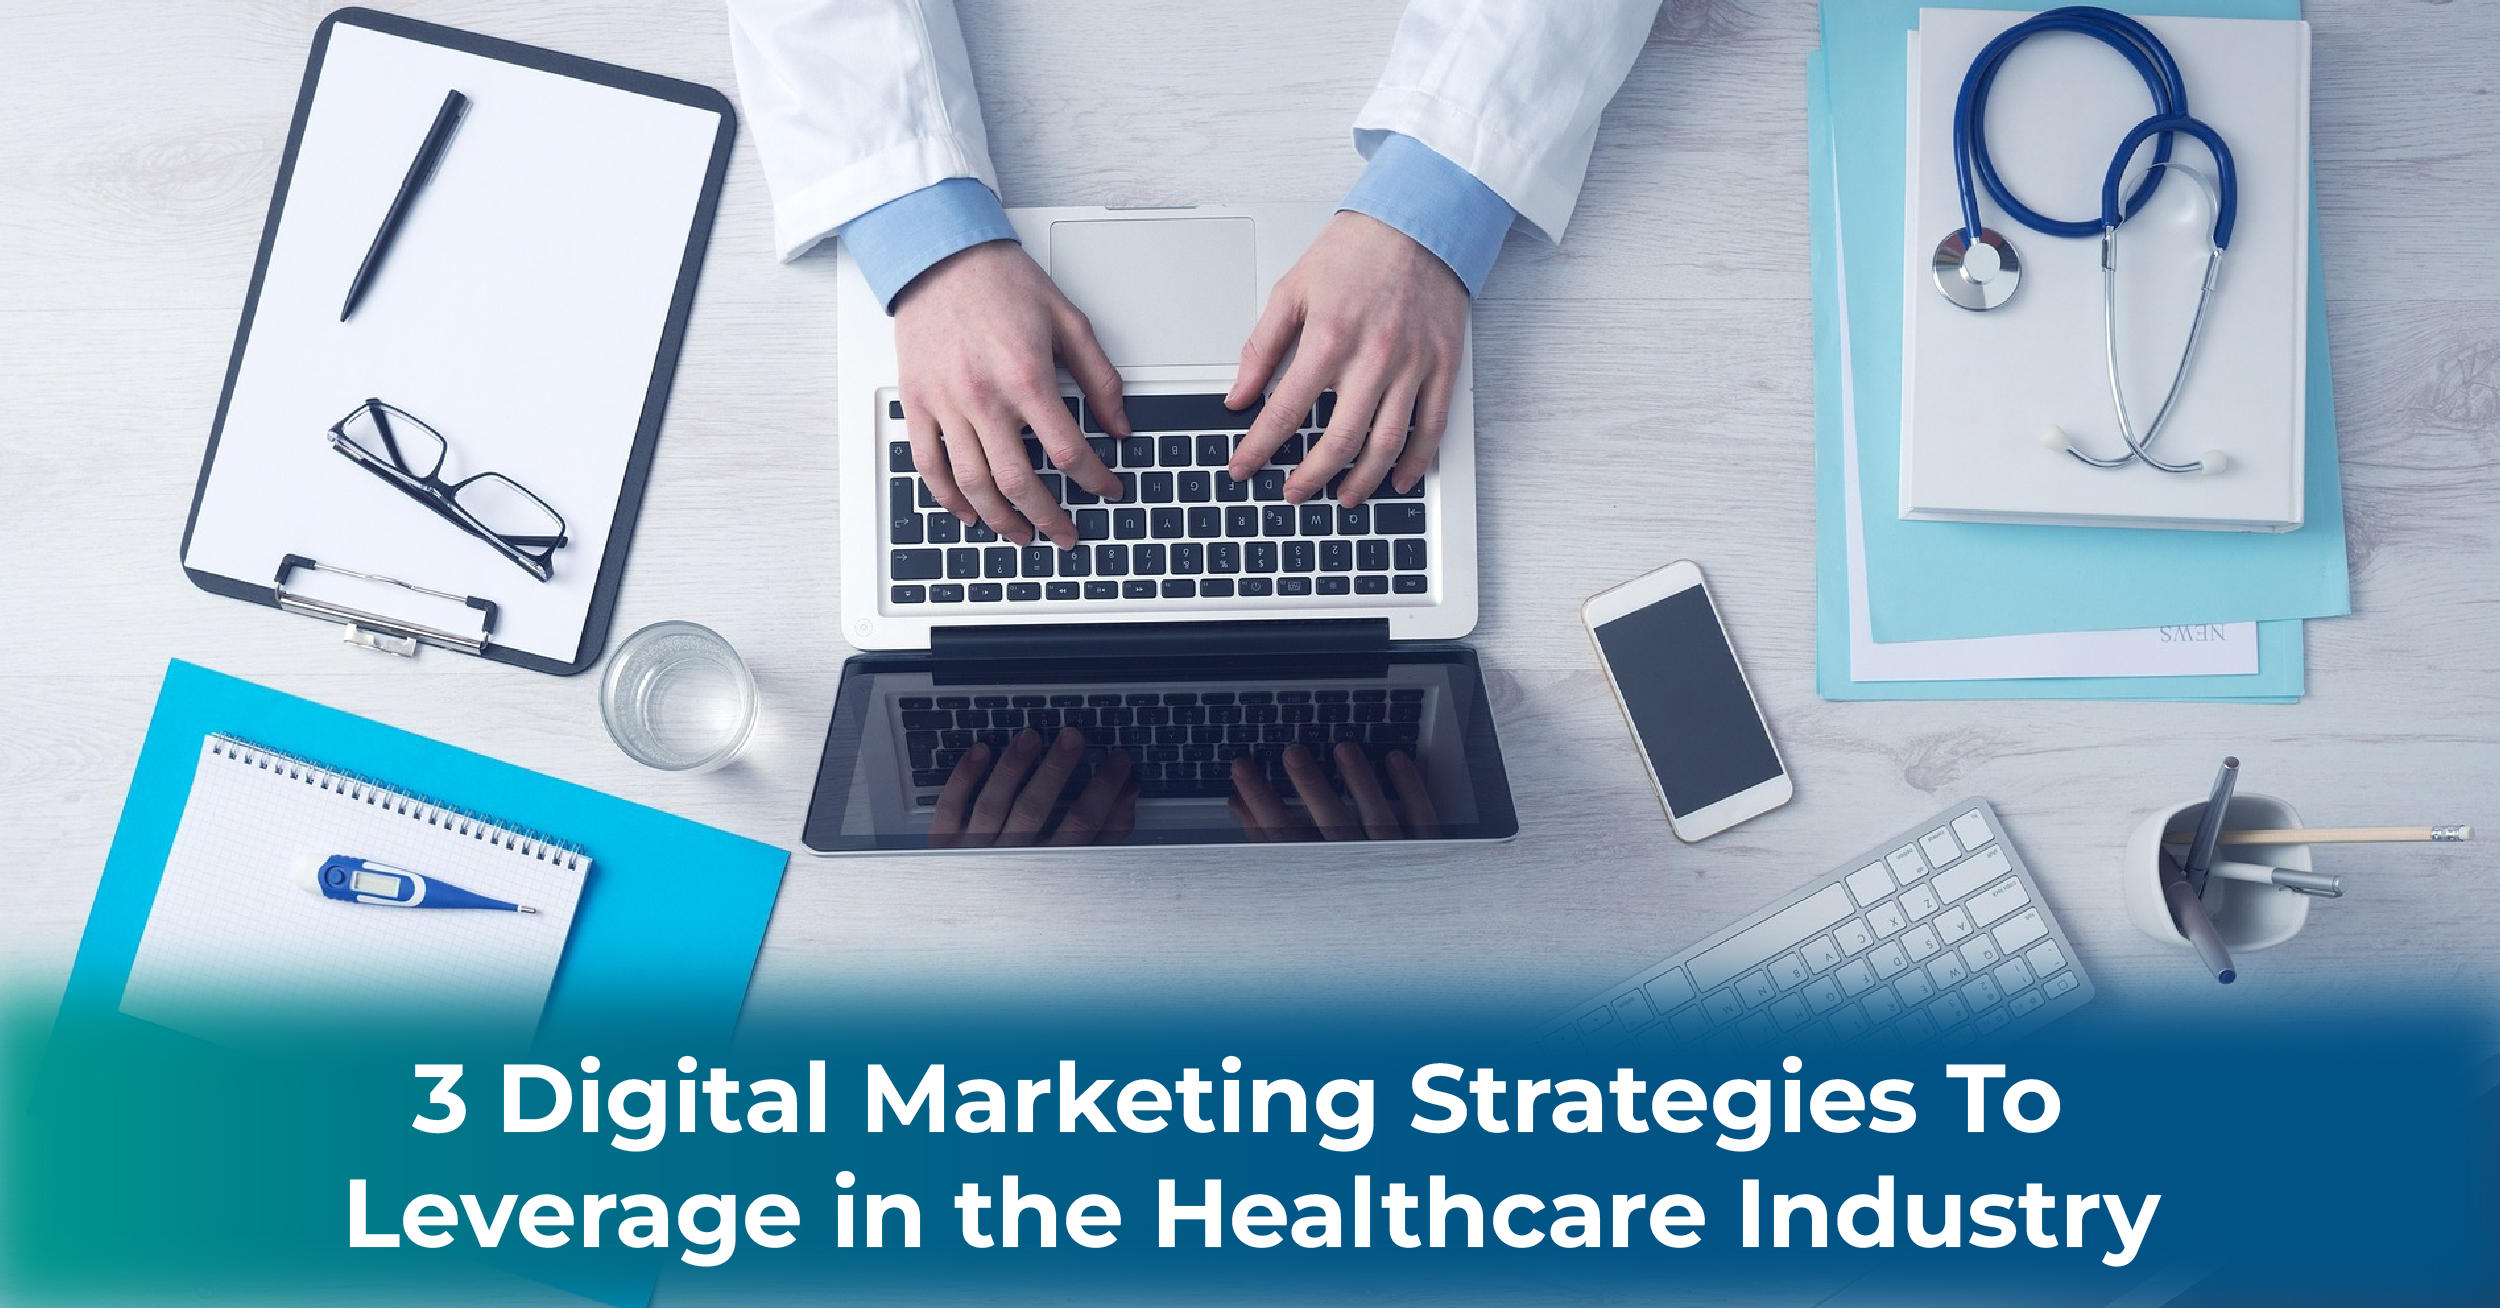 3 Digital Marketing Strategies to Leverage in the Healthcare Industry